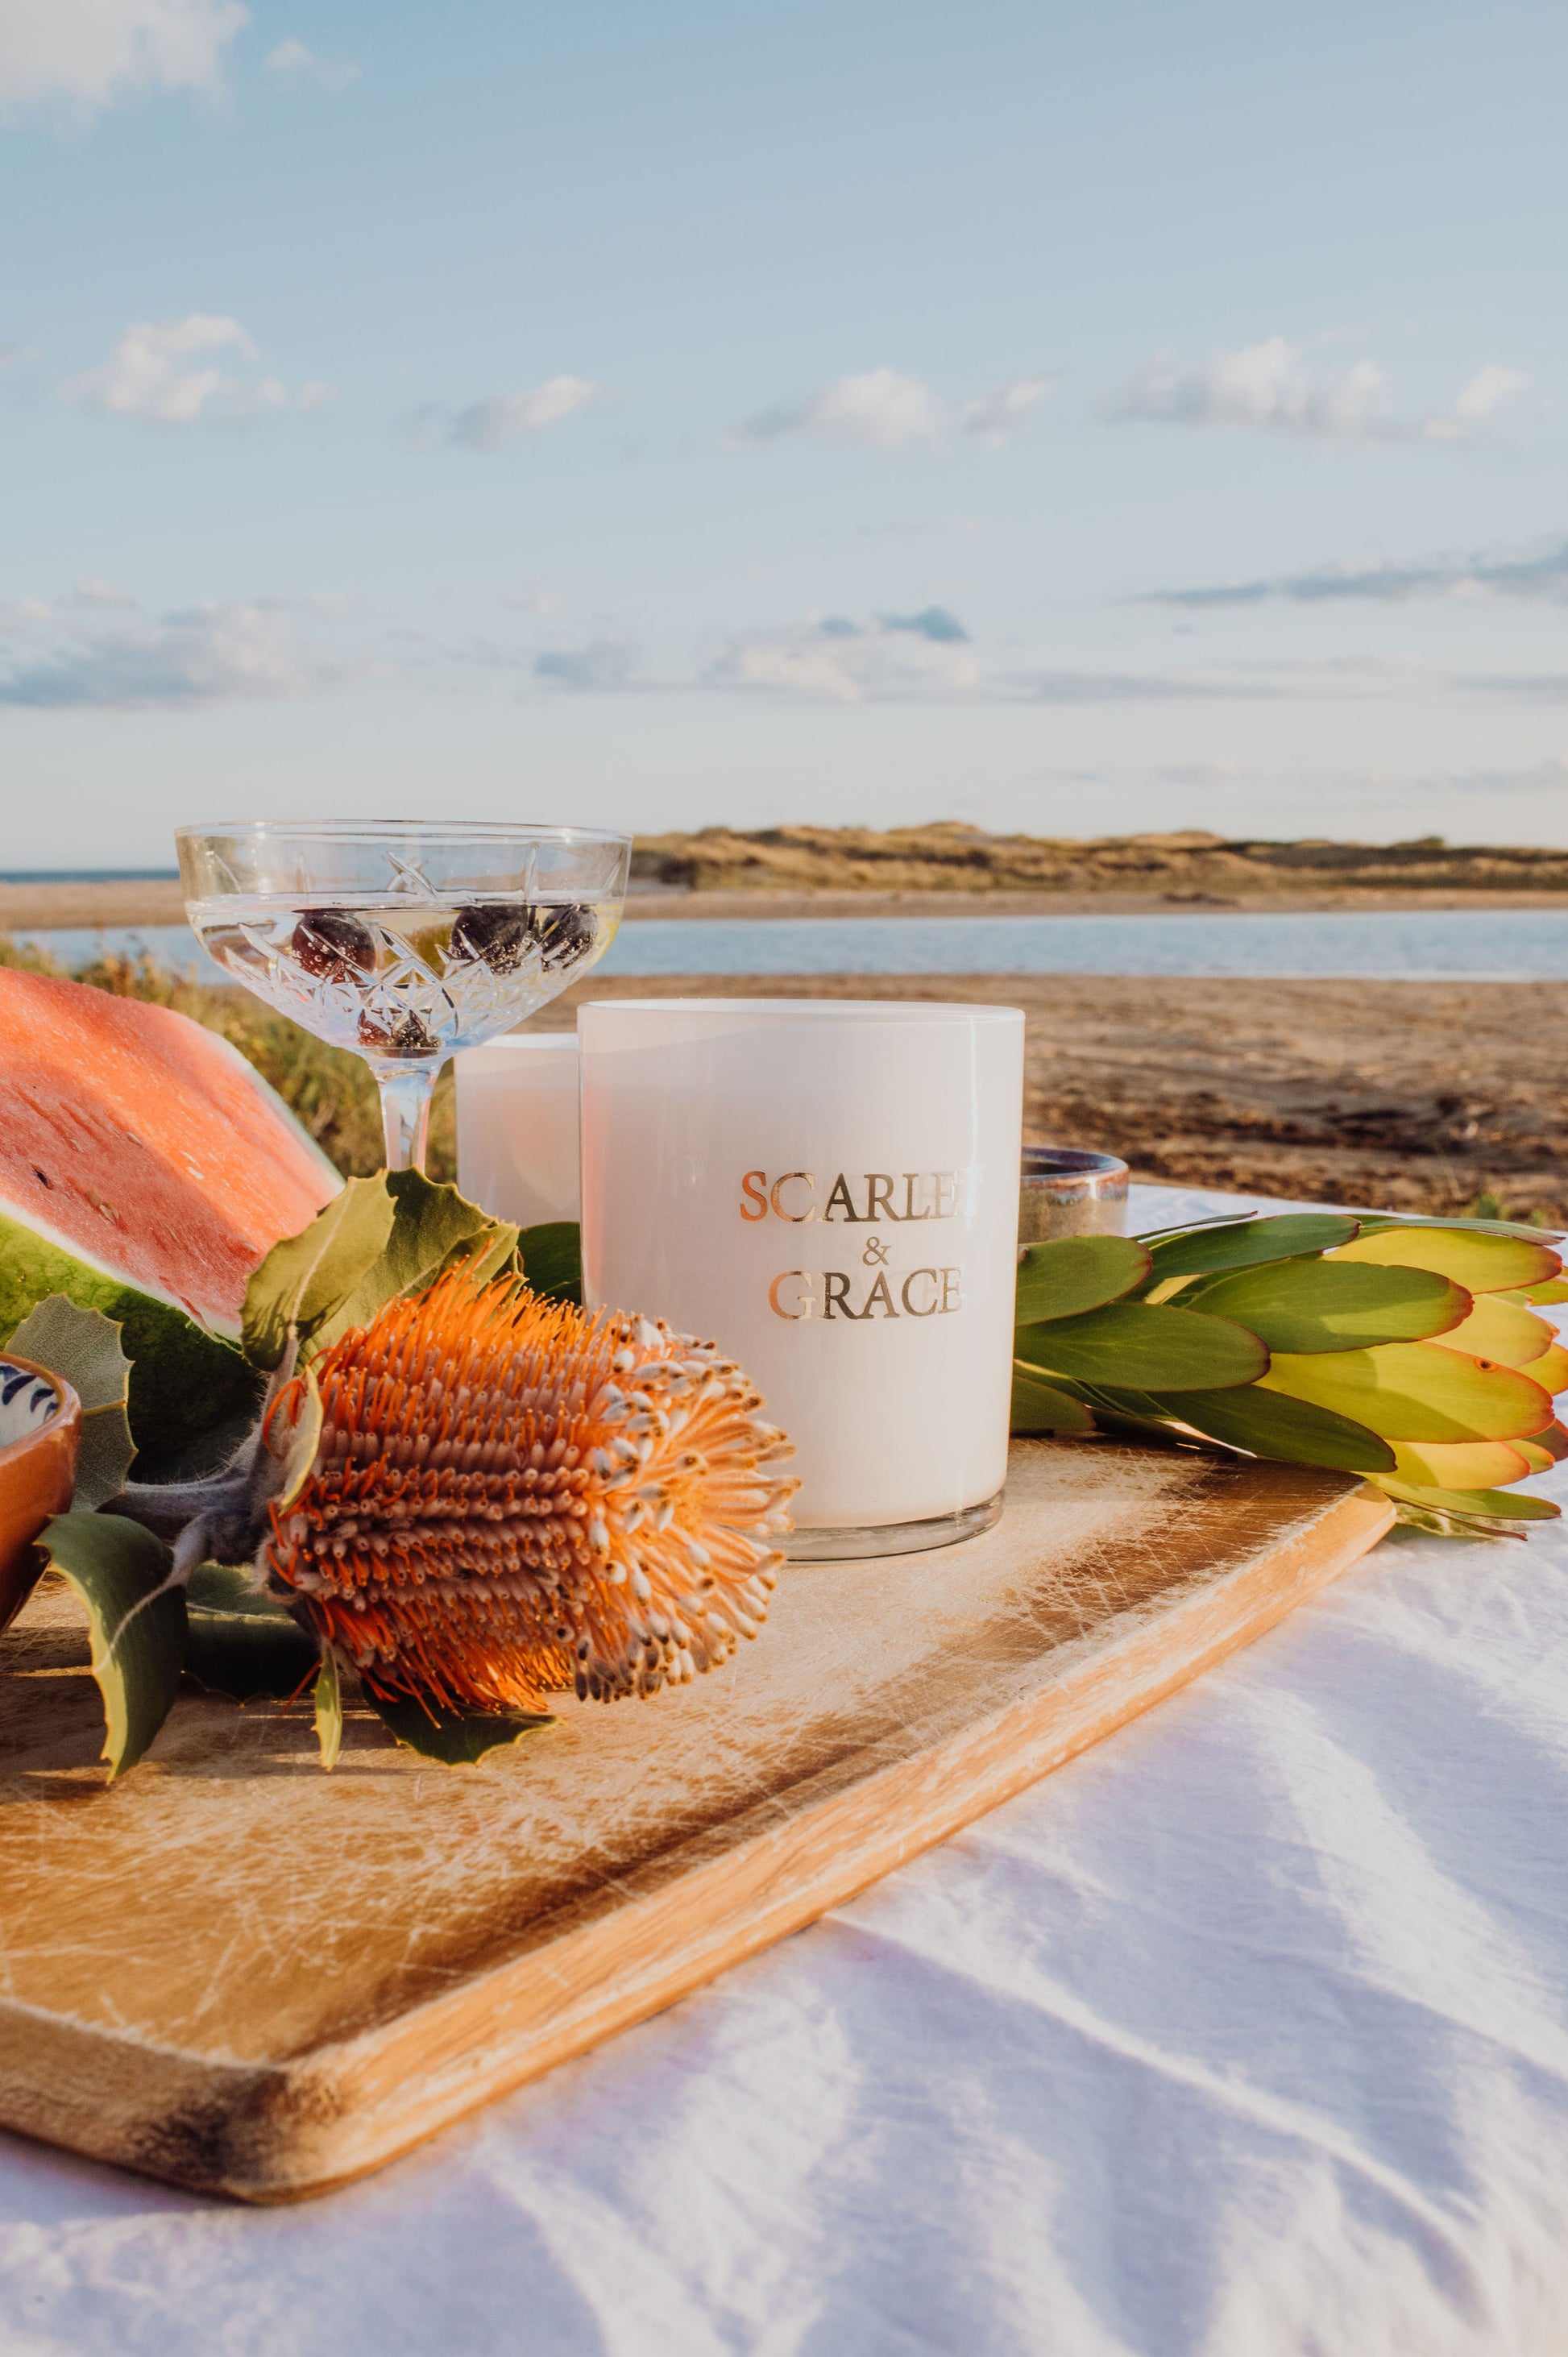 Cable Beach - Sex on the Beach 340gm Soy Wax Candle - Scarlet & Grace